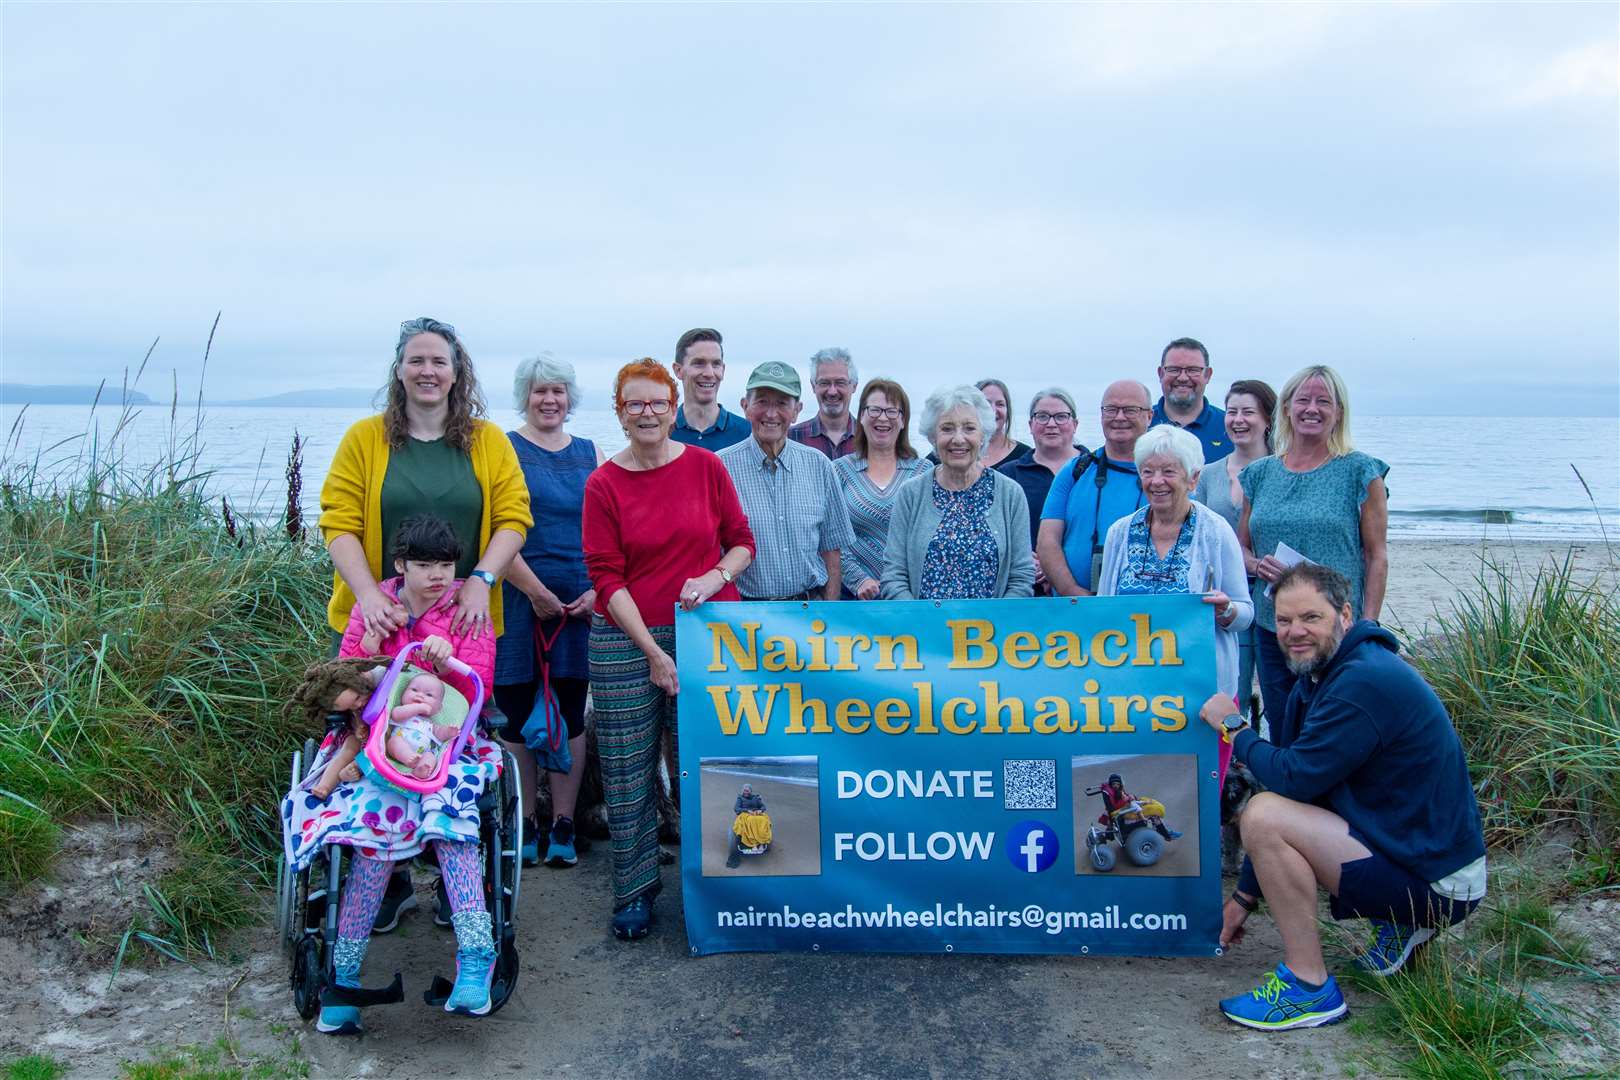 The ceilidh will give a boost to the group that has been working to make Nairn Beach more accessible.